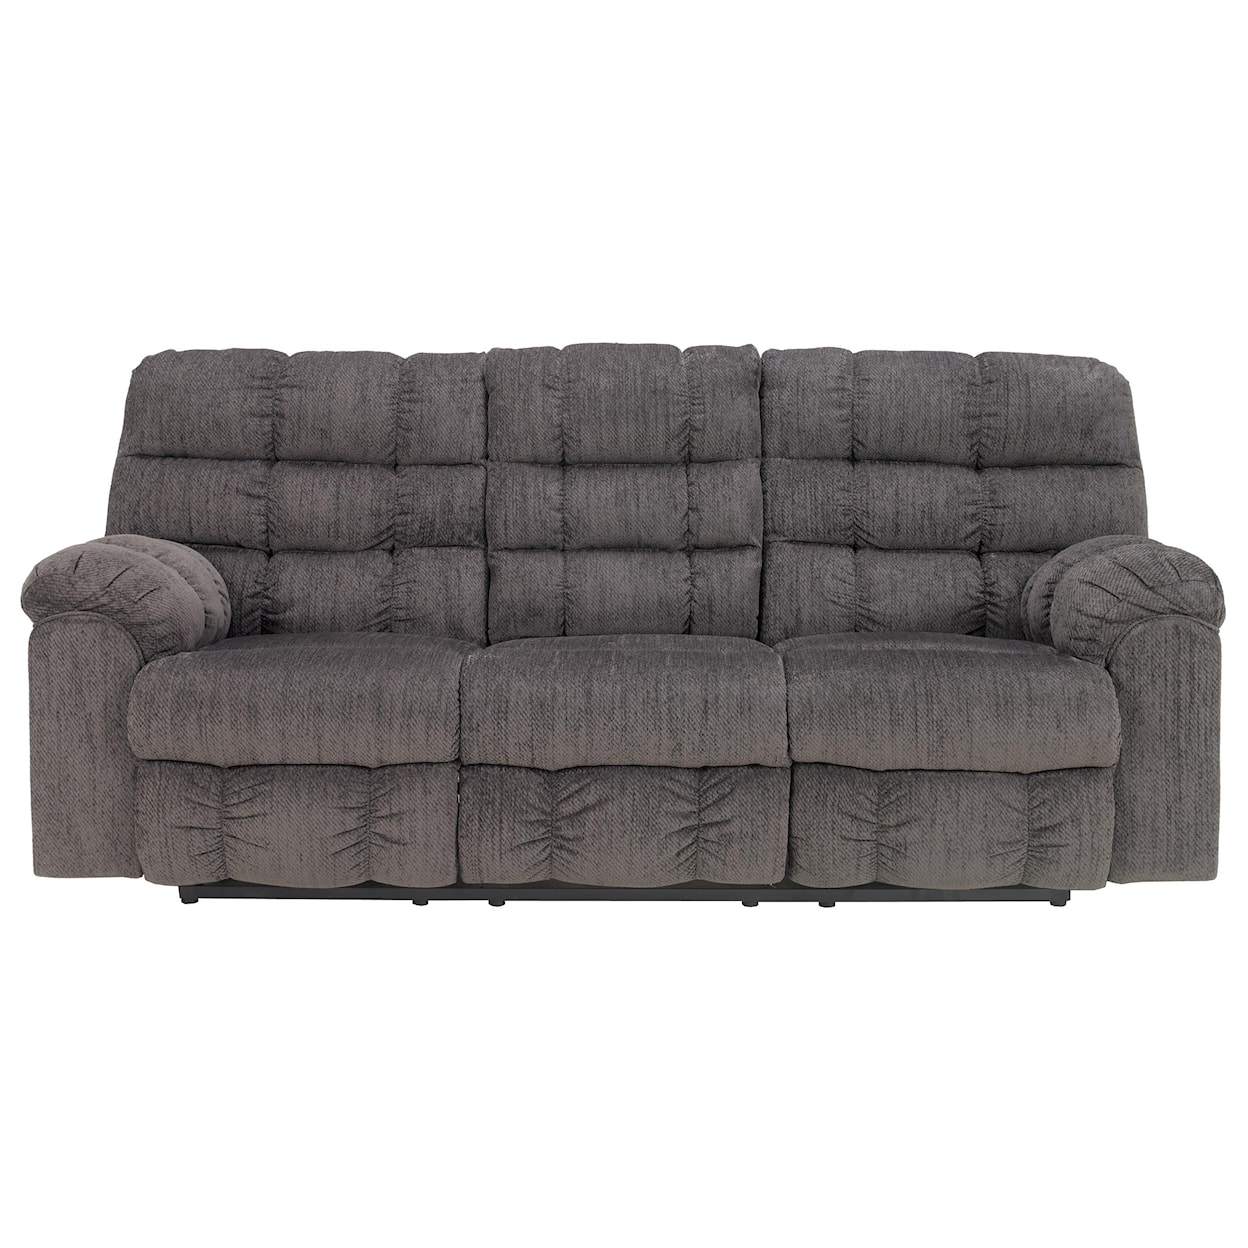 Signature Design by Ashley Acieona - Slate Reclining Sofa with Drop Down Table